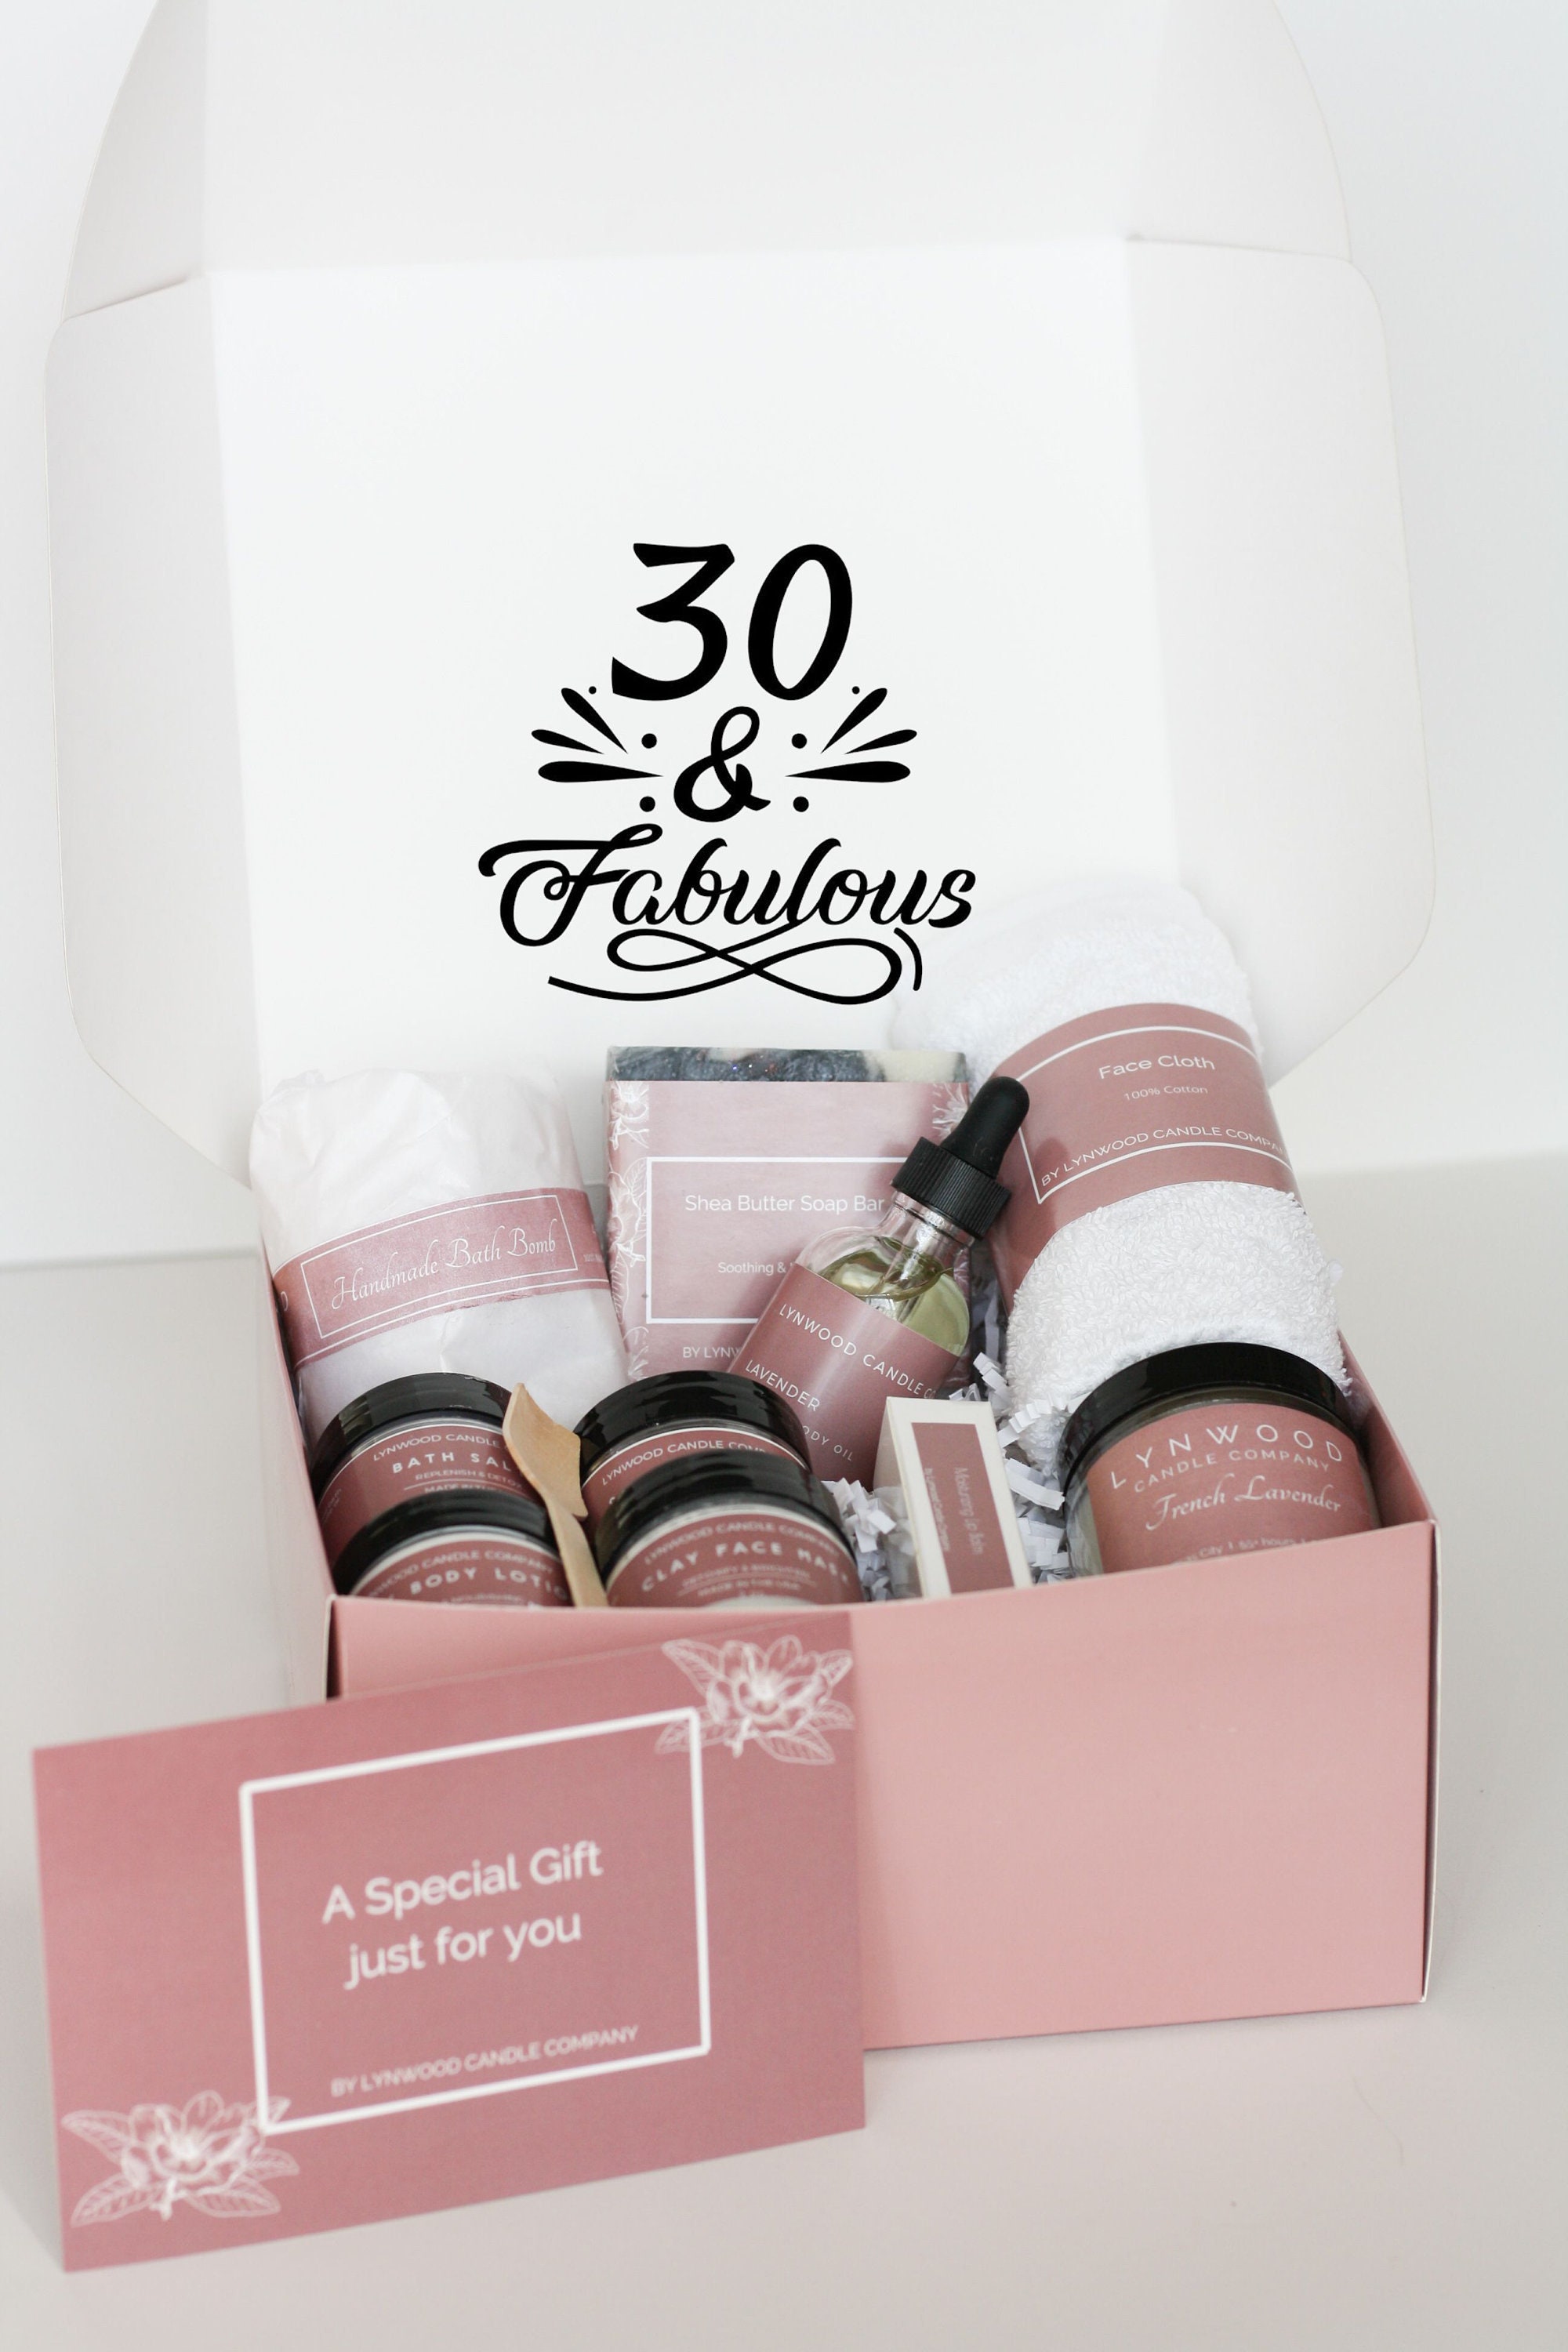  30th Birthday Gifts for Her, 30 Years Old Birthday Gift for  Women, Fabulous Funny Happy Birthday Gift Set for Best Friend,Teacher,  Wife, Sister, Coworker or Partner : Home & Kitchen